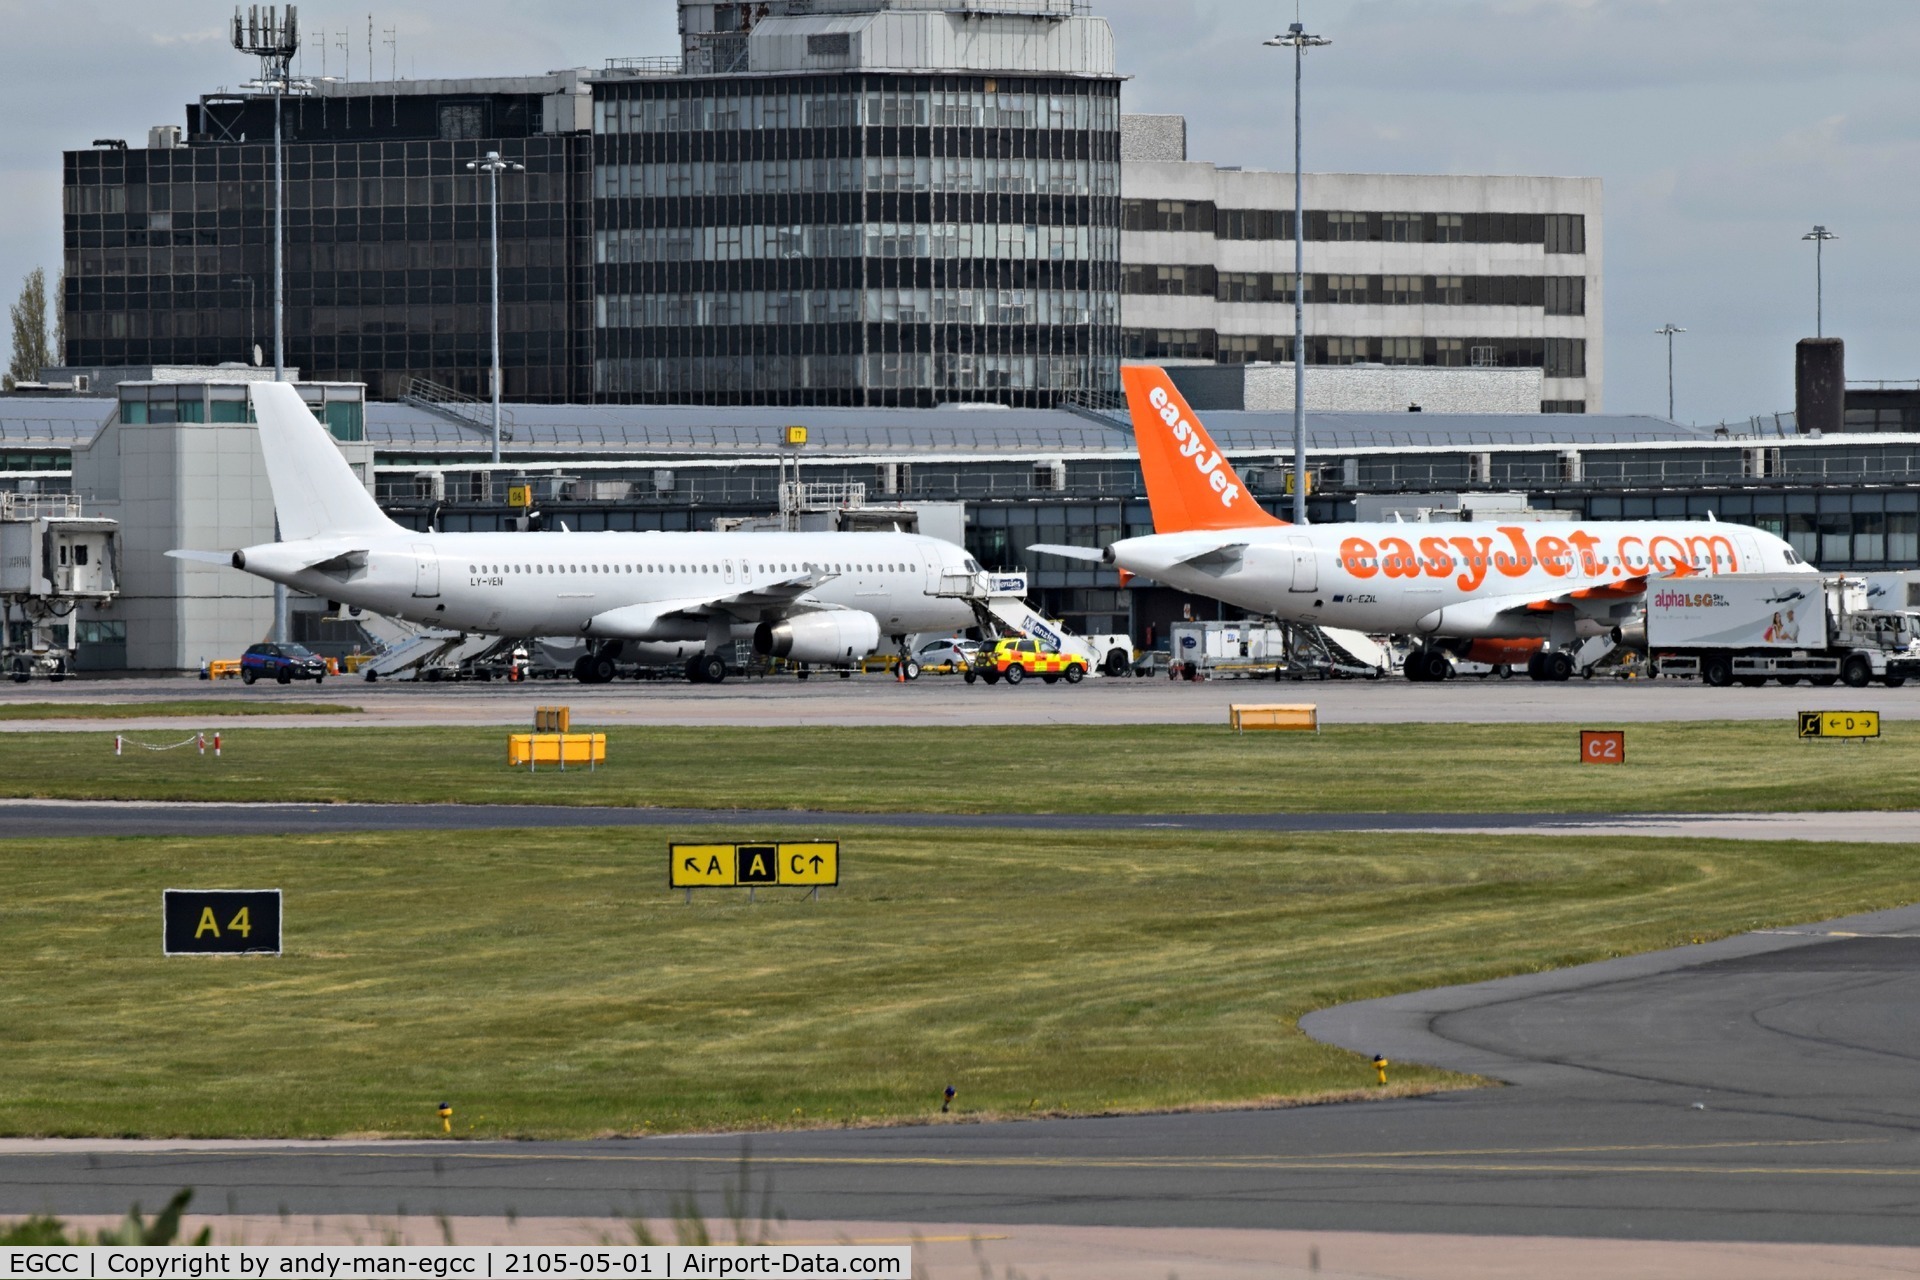 Manchester Airport, Manchester, England United Kingdom (EGCC) - on the left is LY-VEN A320 parked on its stand/gate and on the right is G-EZIL A319 EZY parked on its stand/gate